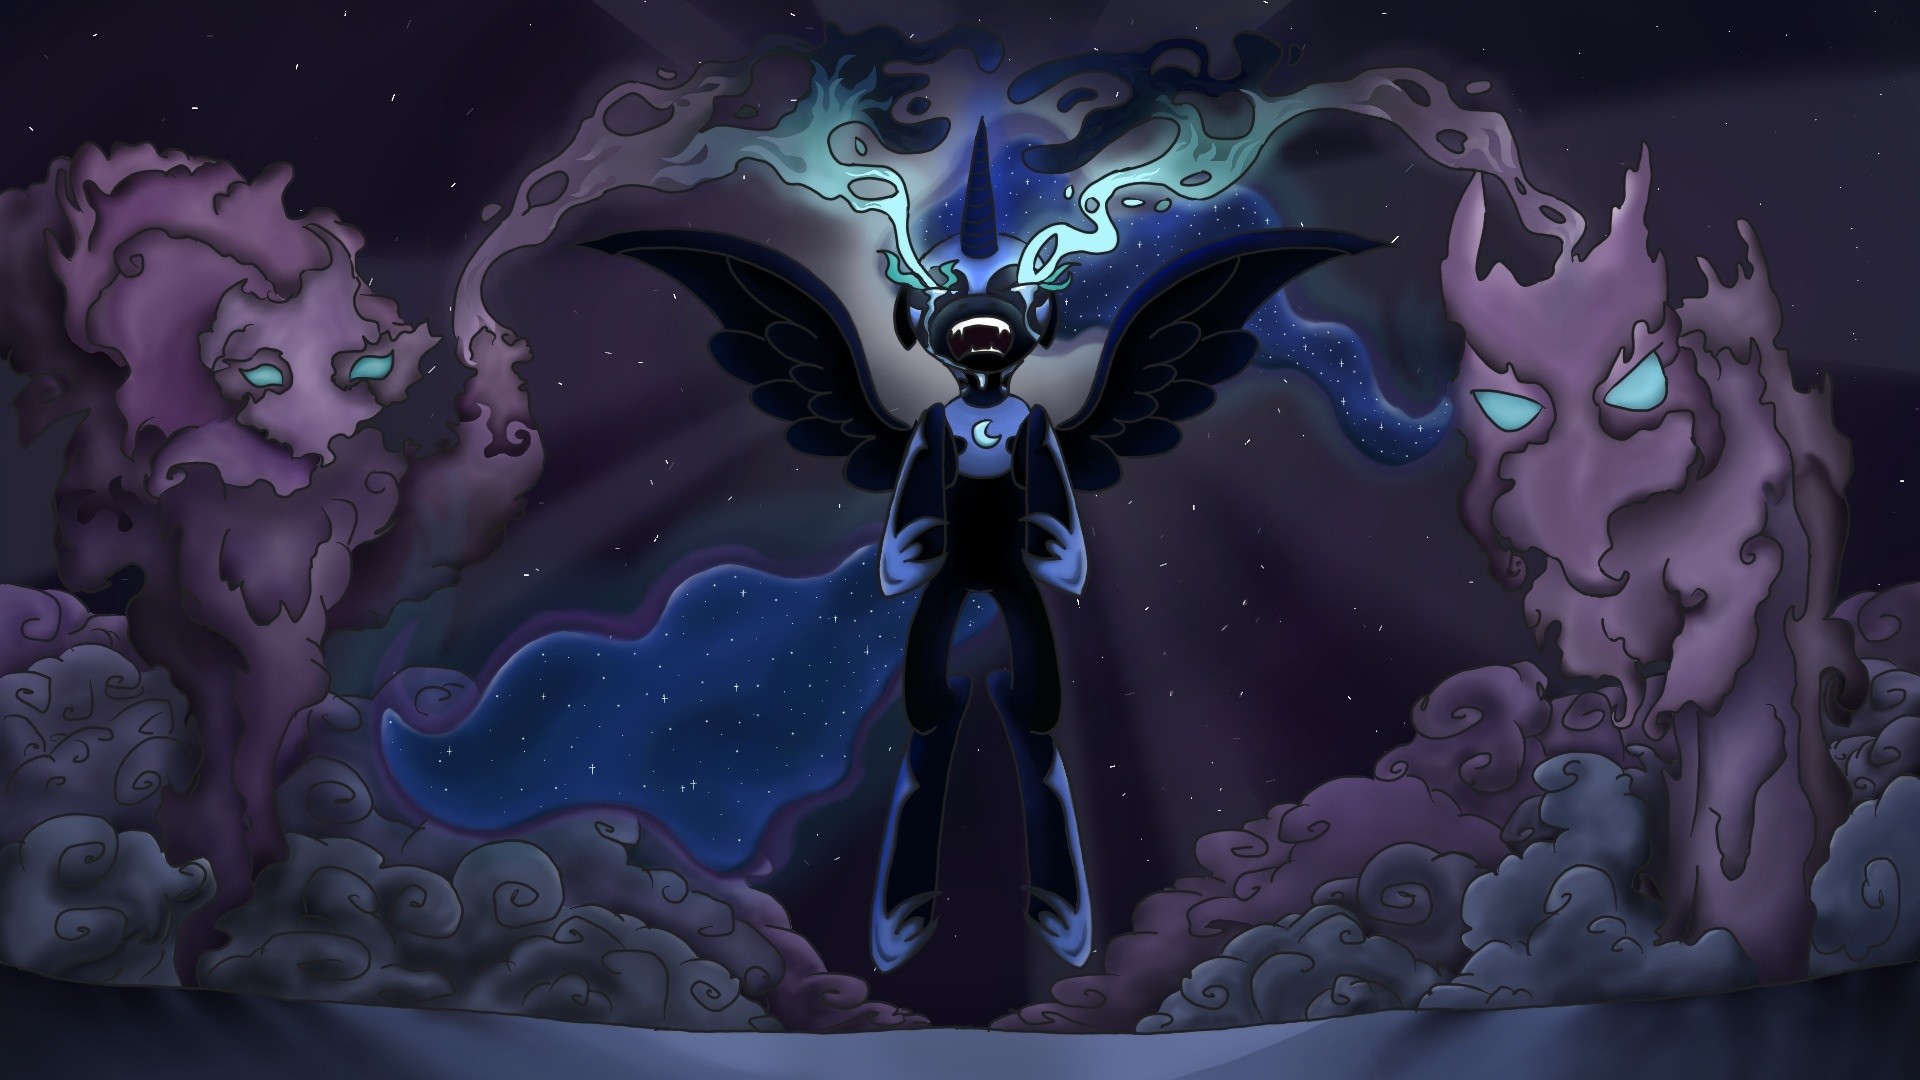 1920x1080 Nightmare Moon's Takeover by Yoshicat02 Nightmare Moon's Takeover by  Yoshicat02